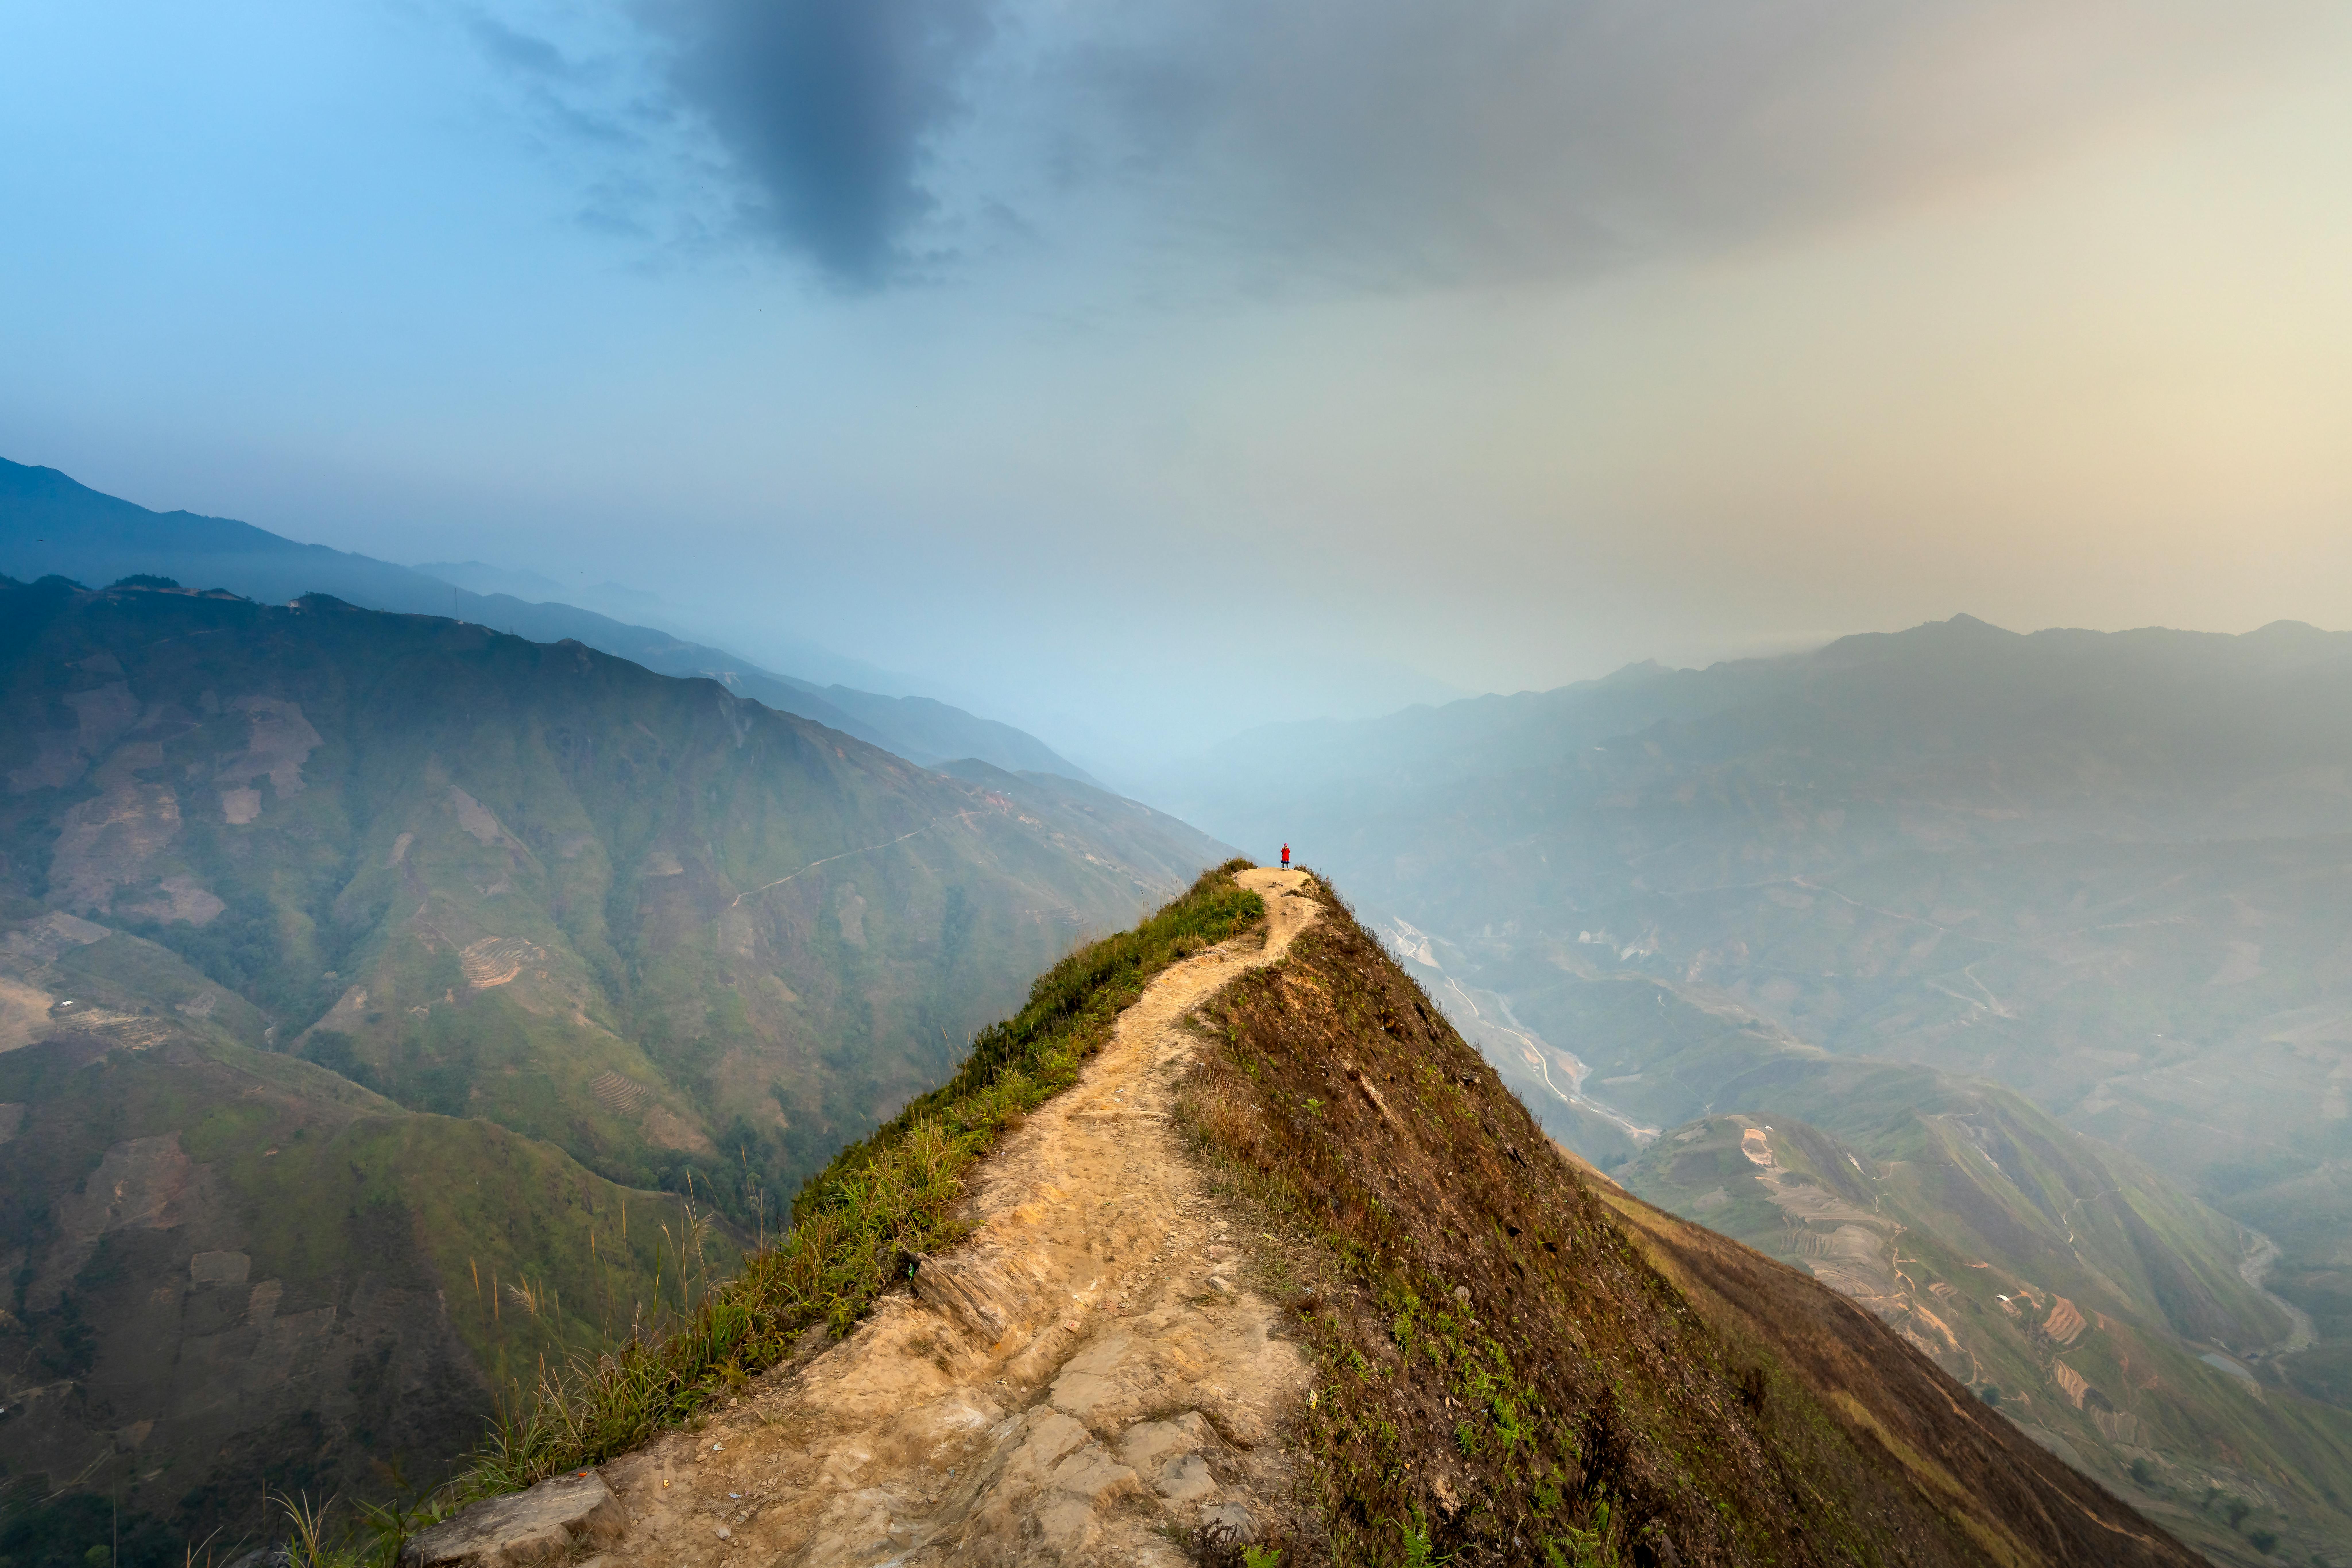 Narrow footpath leading to edge of amazing mountain cliff with traveler standing on top observing picturesque terrain